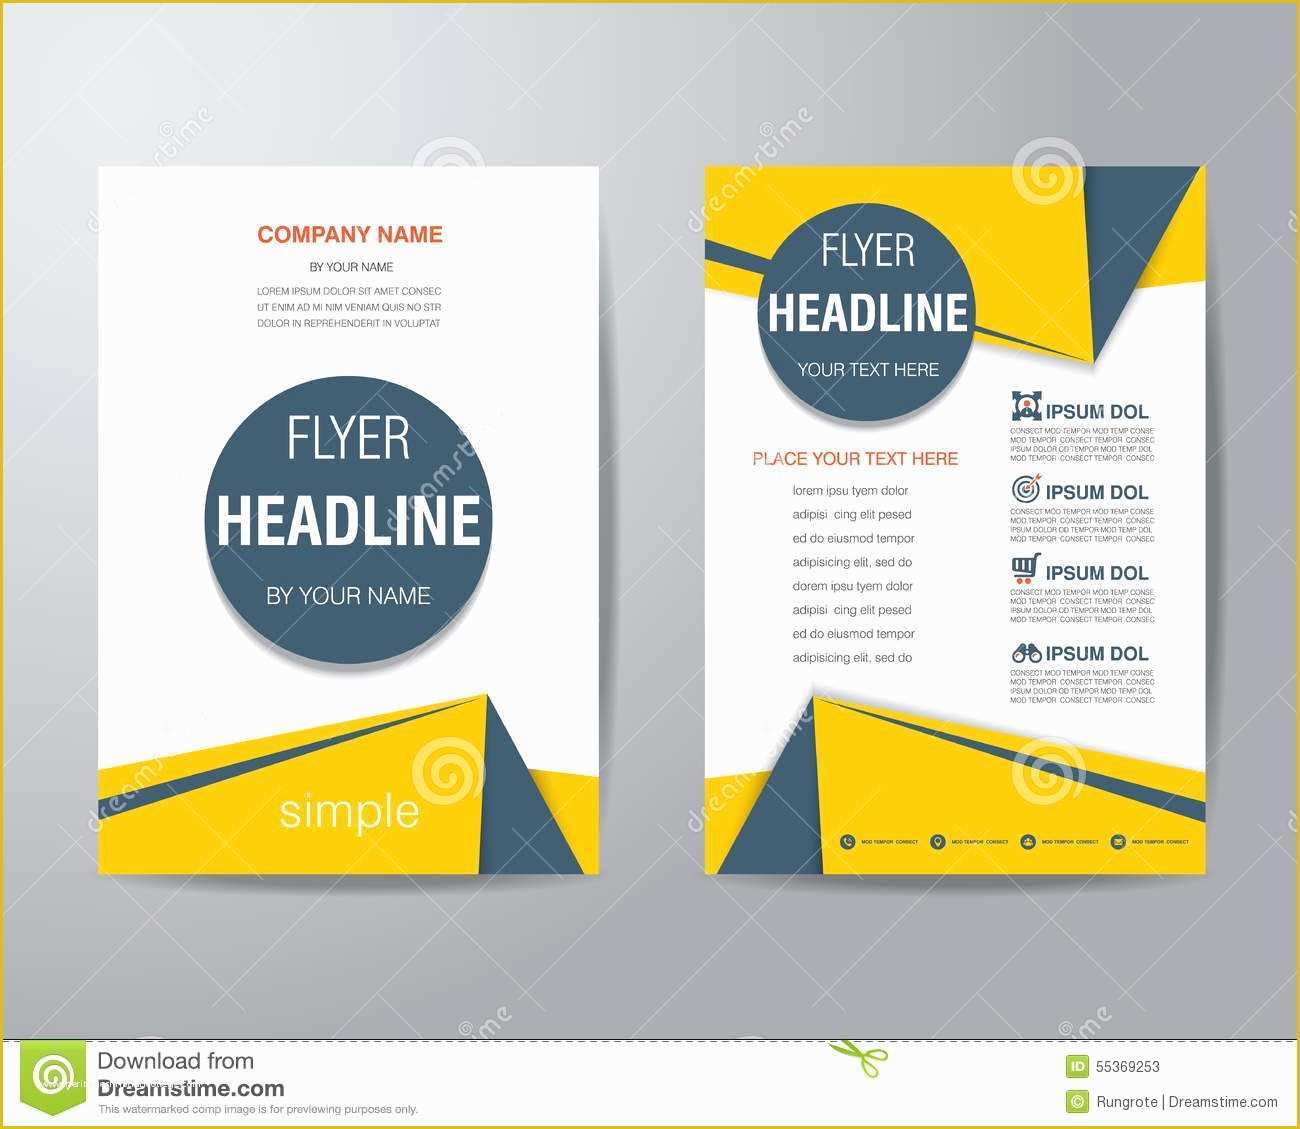 Free Flier Templates Of Pin by Leelentine On Cadspec Marketing Ideas